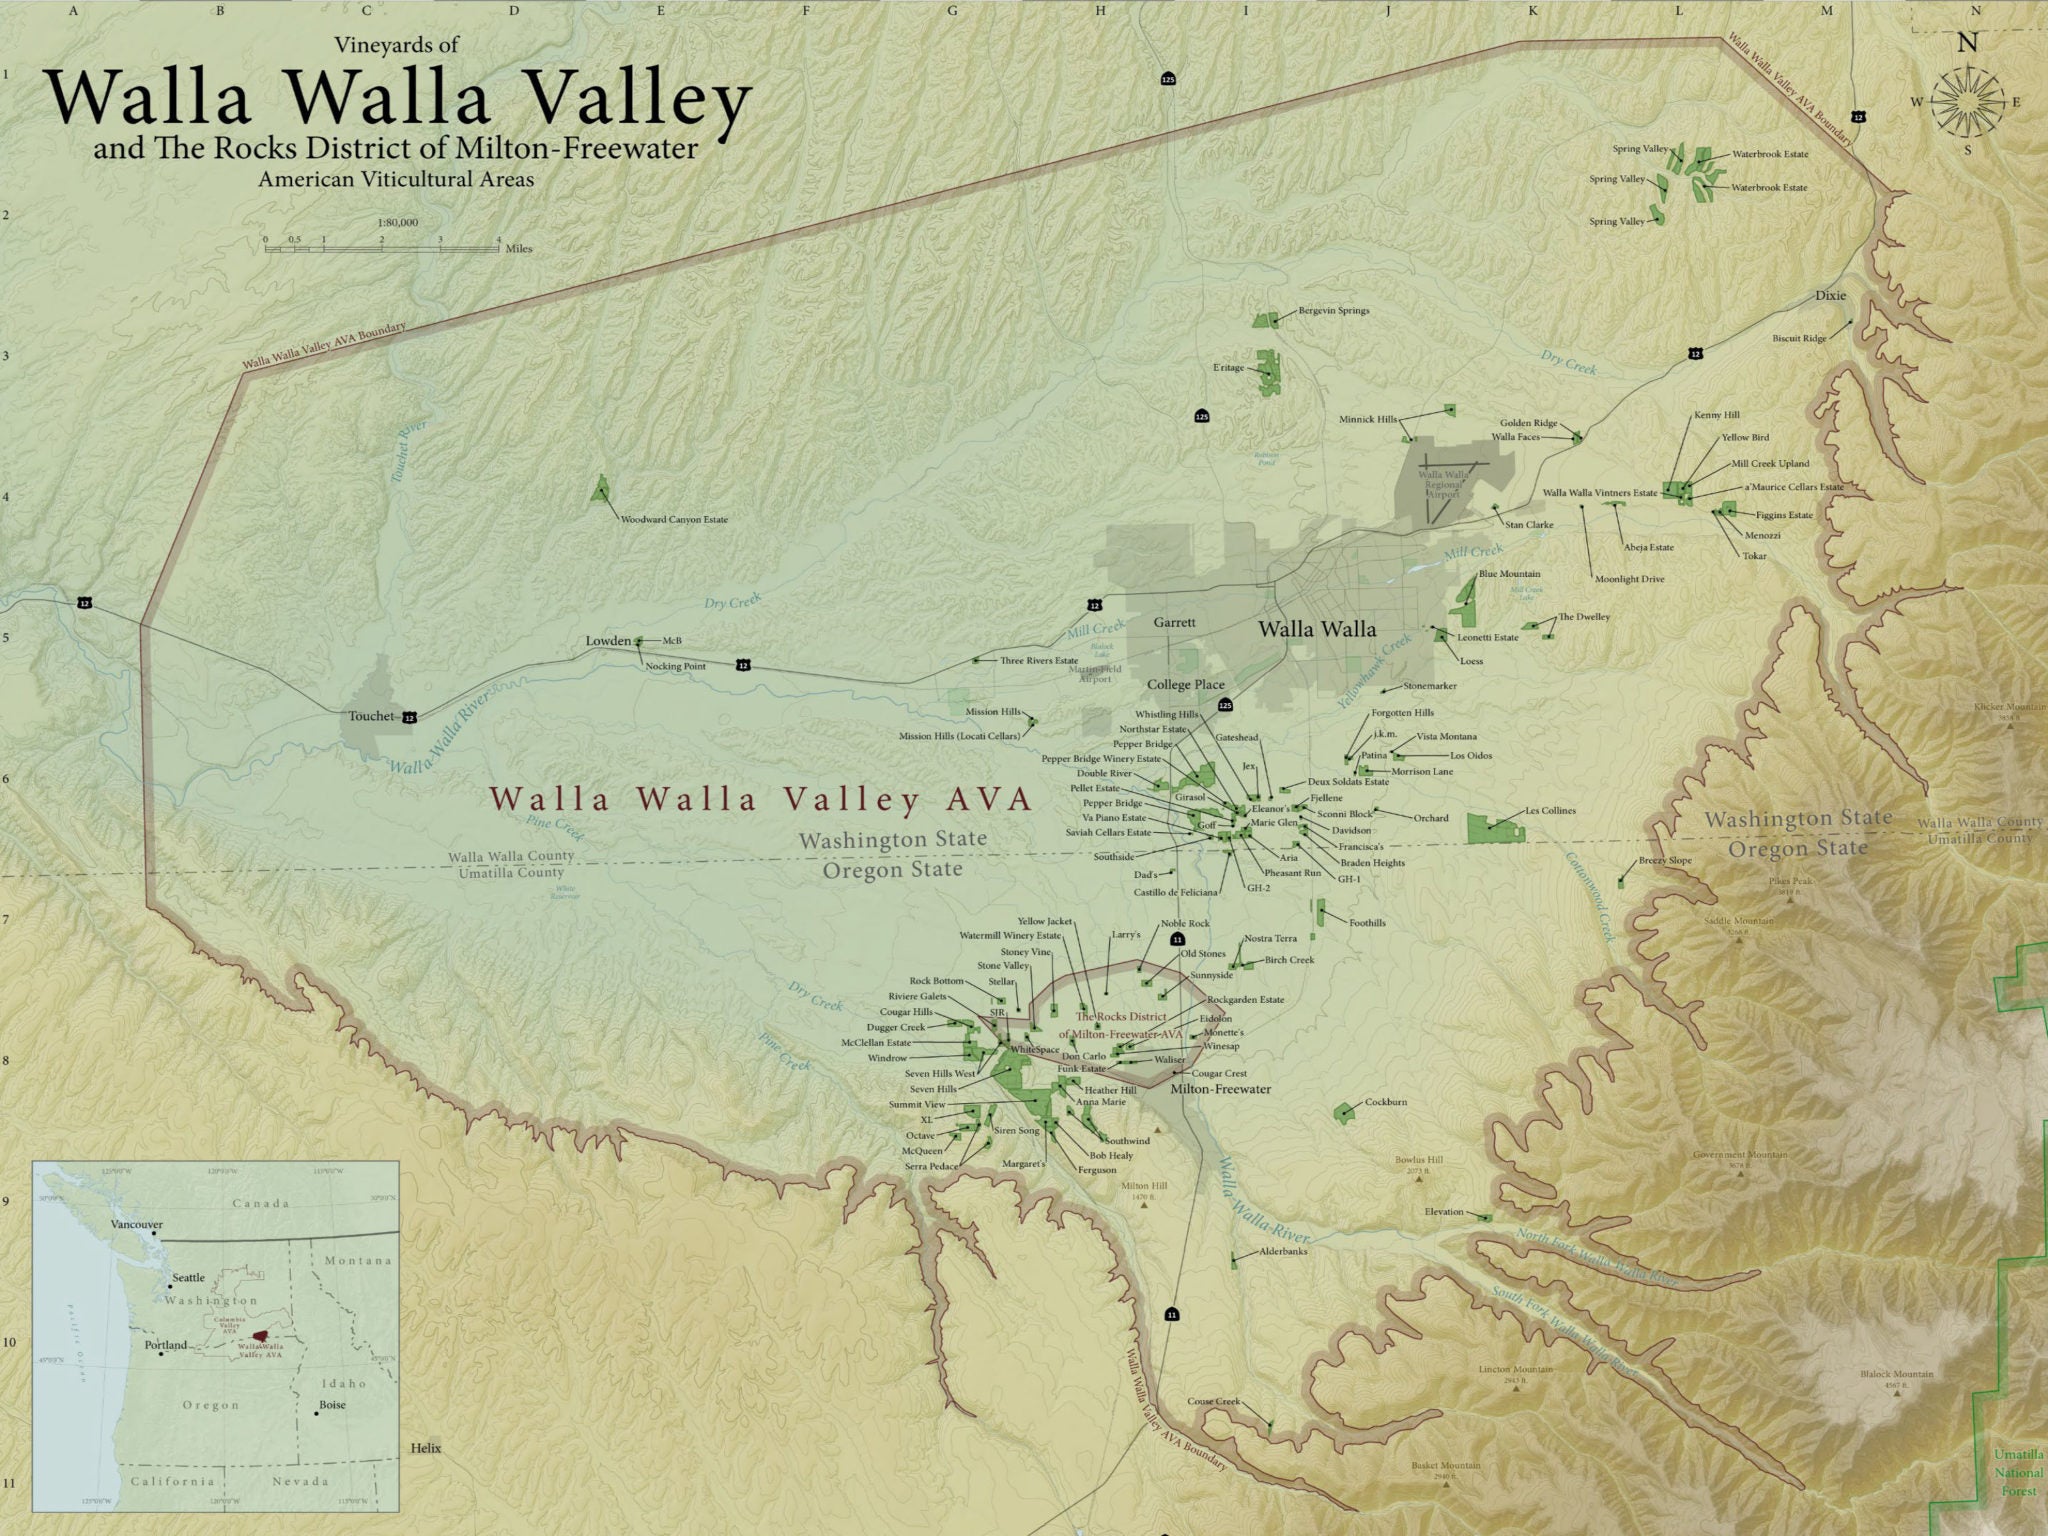 Map of the Walla Walla Valley American Viticultural Area Boundaries and Vineyard Sites